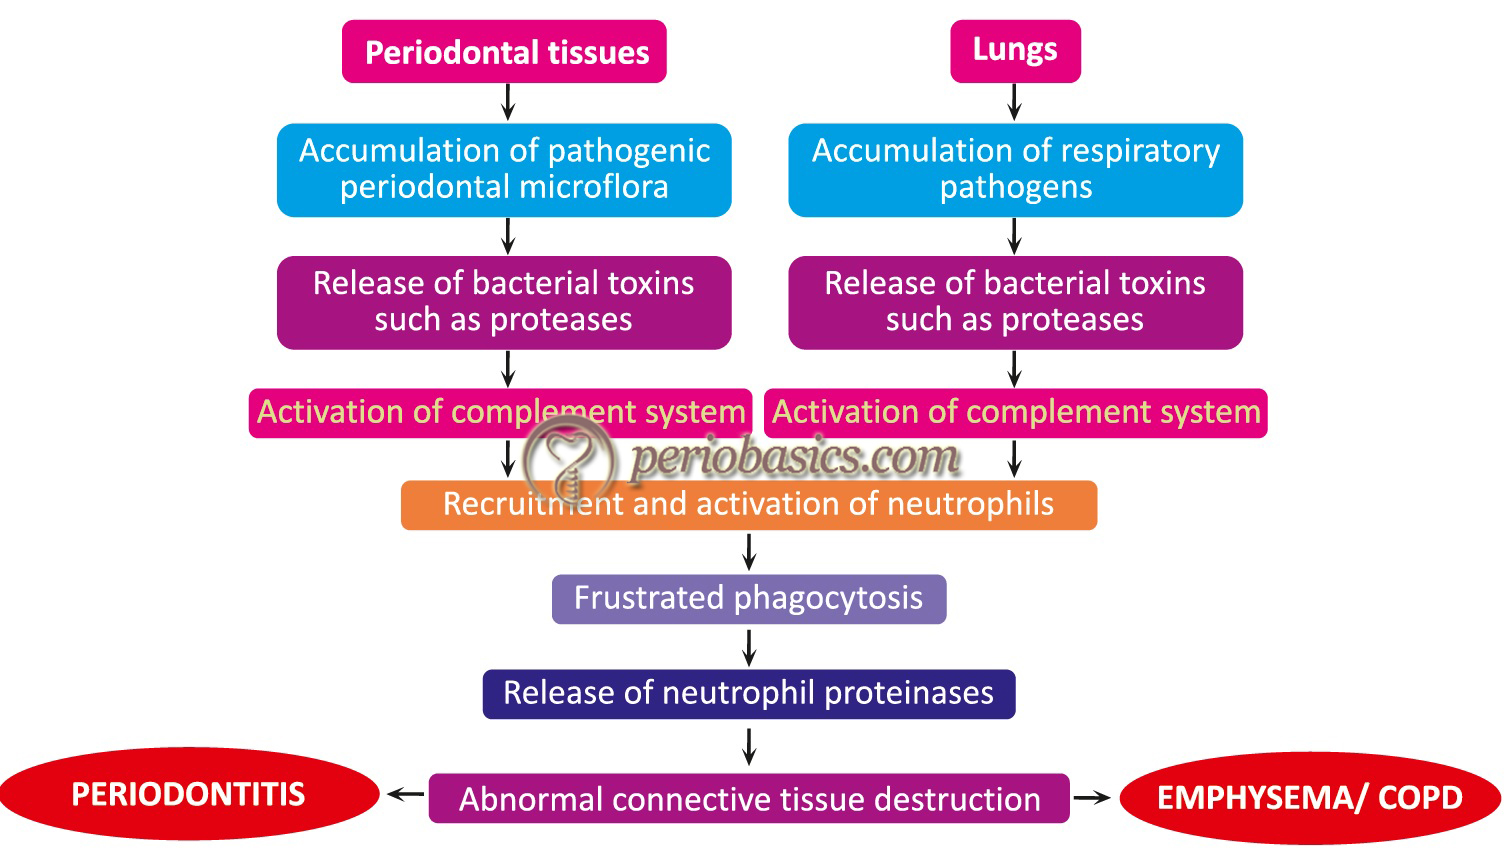 Flow chart describing a basic mechanism of pathogenesis of periodontitis and pulmonary diseases.